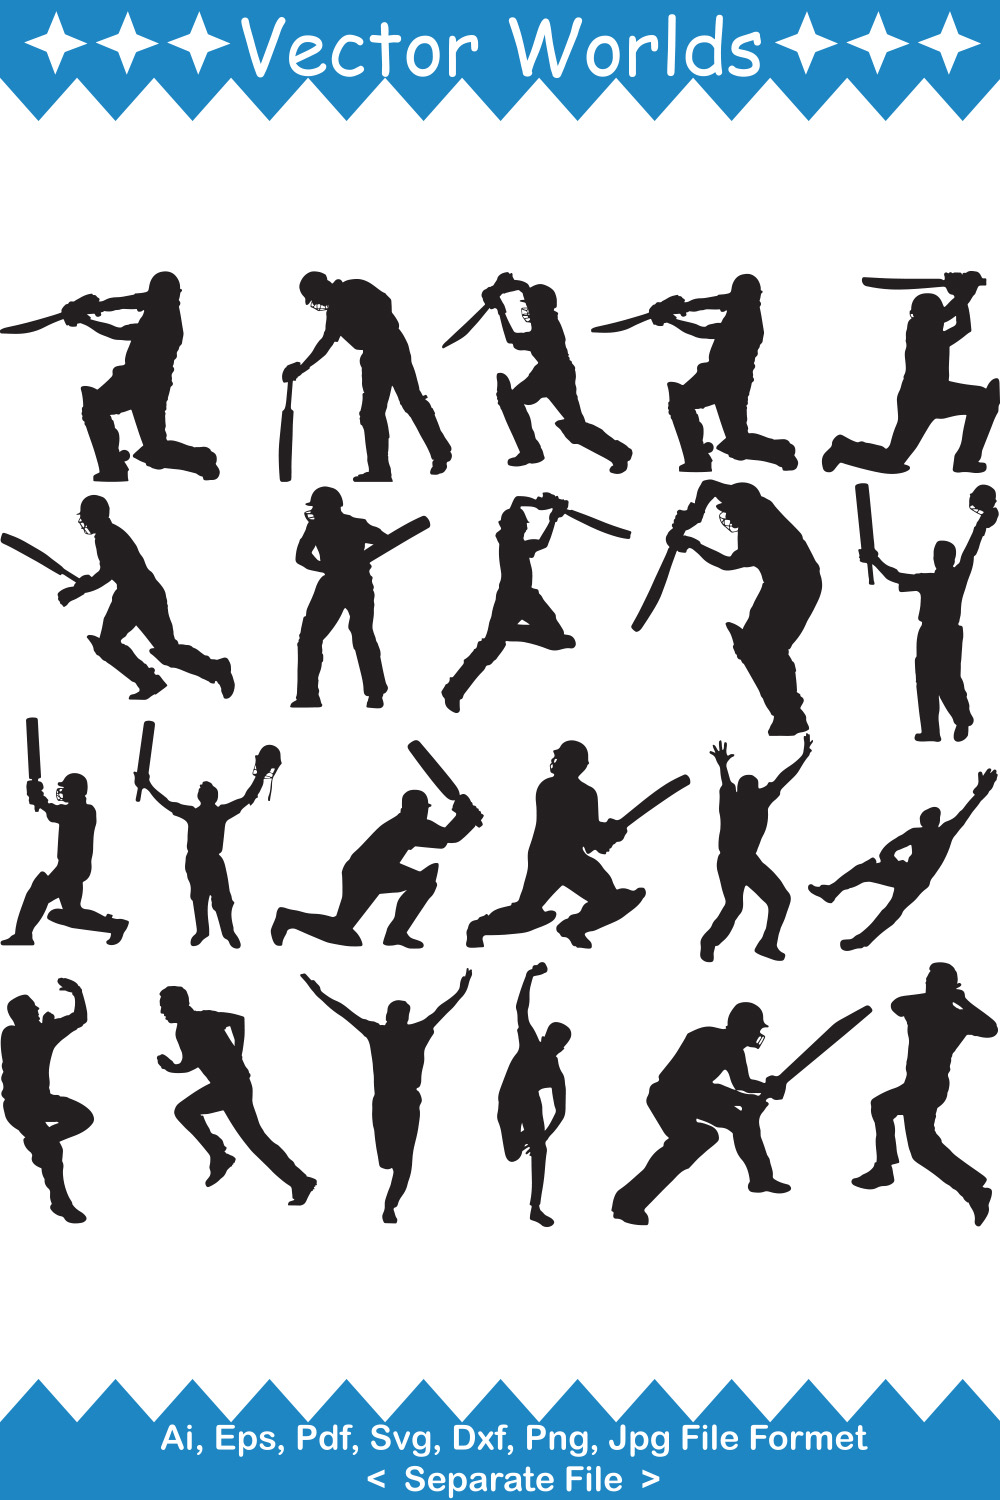 Collection of enchanting vector image of silhouettes of cricket players